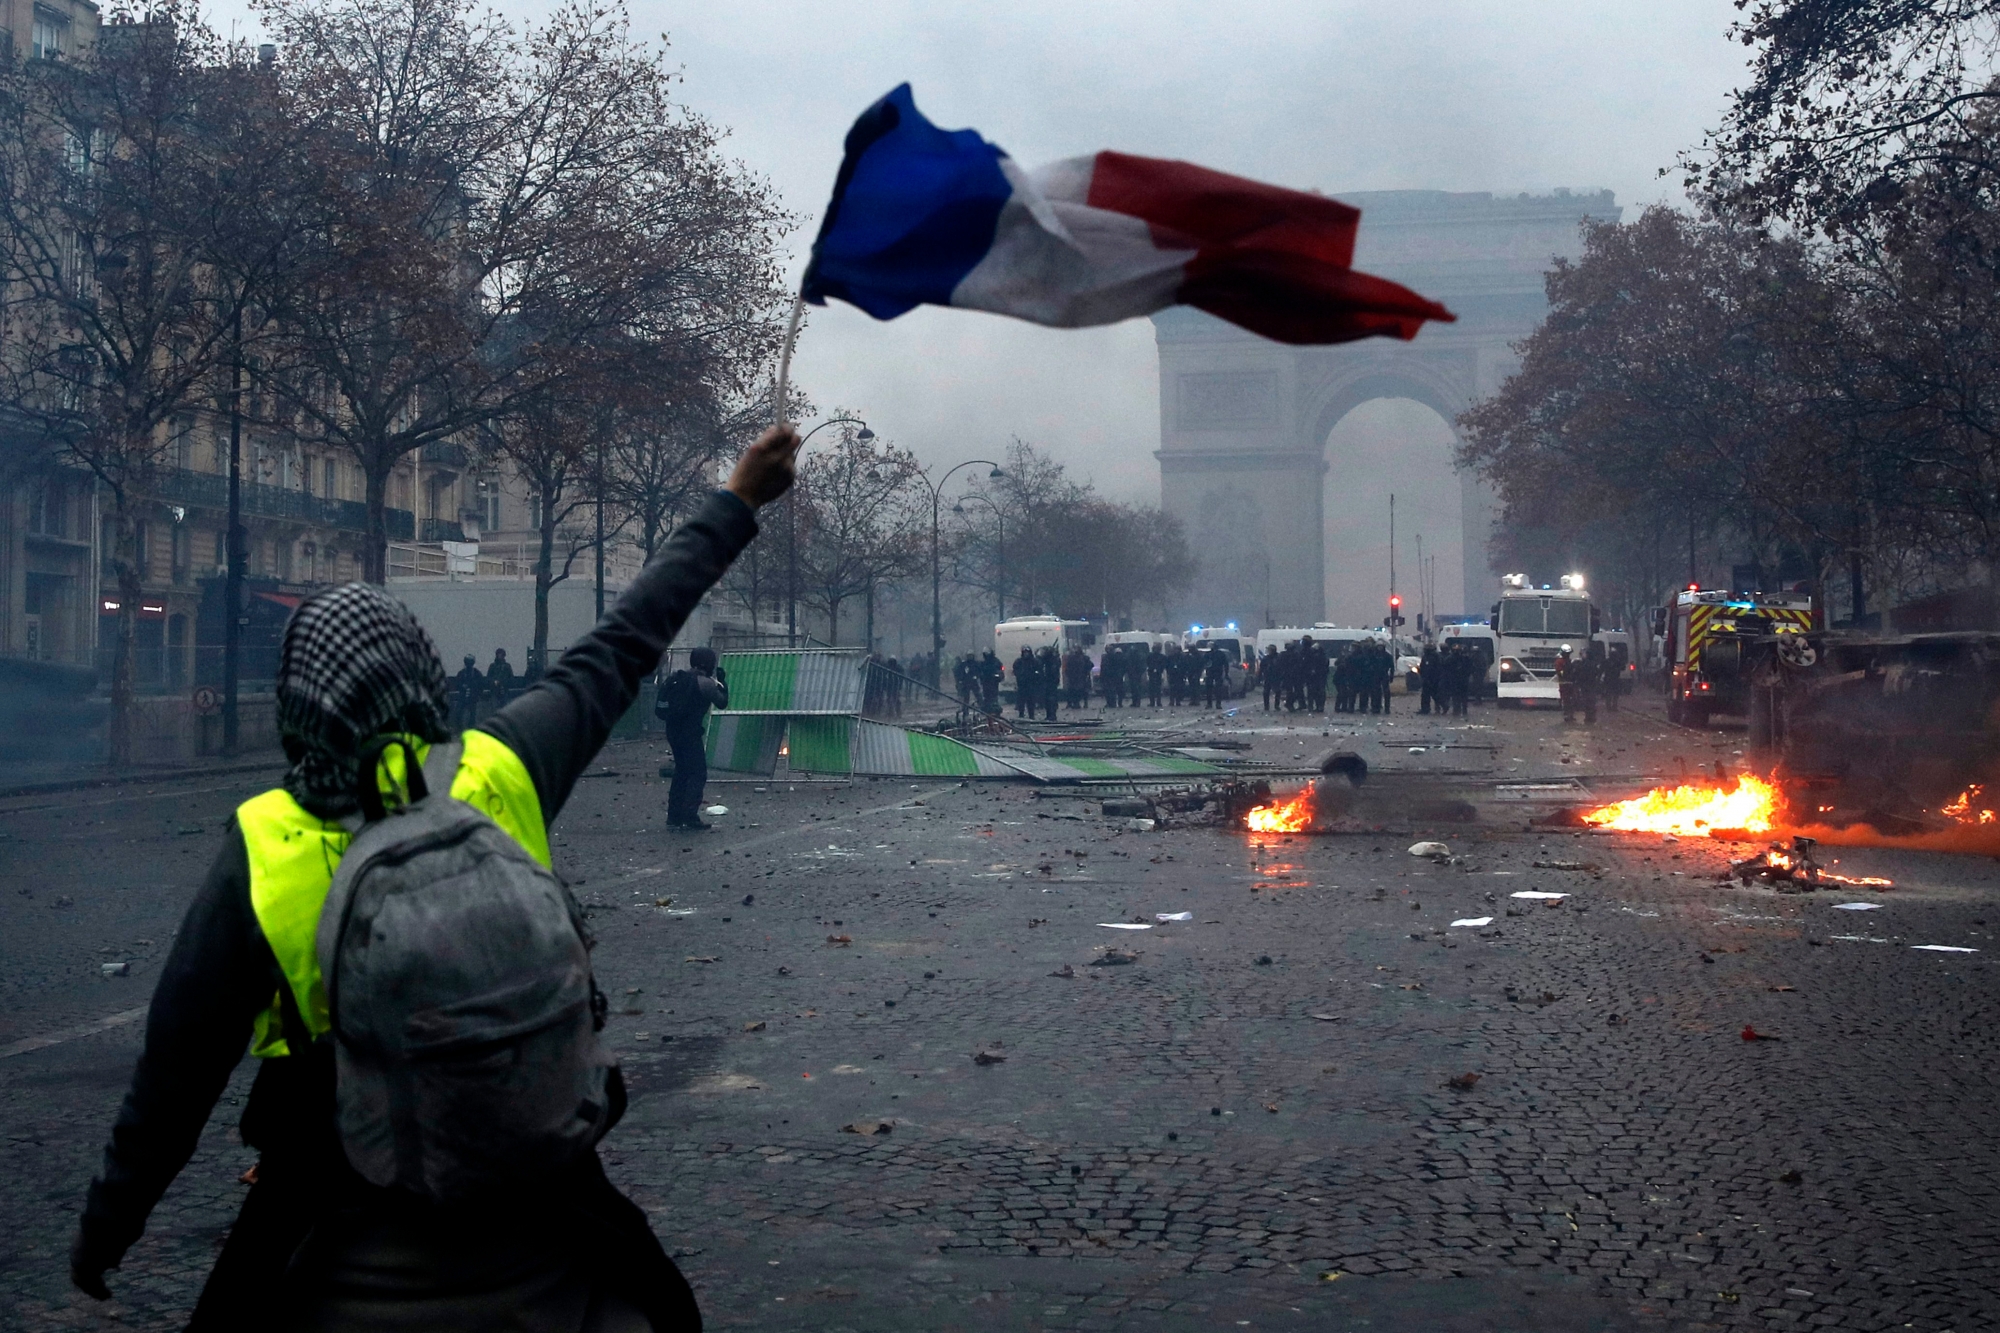 epa07202682 A protester wearing a yellow vest (gilets jaunes) waves a French flag during clashes with riot police near the Arc de Triomphe as part of a demonstration over high fuel prices on the Champs Elysee in Paris, France, 01 December 2018. The so-called 'gilets jaunes' (yellow vests) are a protest movement, which reportedly has no political affiliation, is protesting across the nation over high fuel prices.  EPA/YOAN VALAT FRANCE PROTEST FUEL TAXES